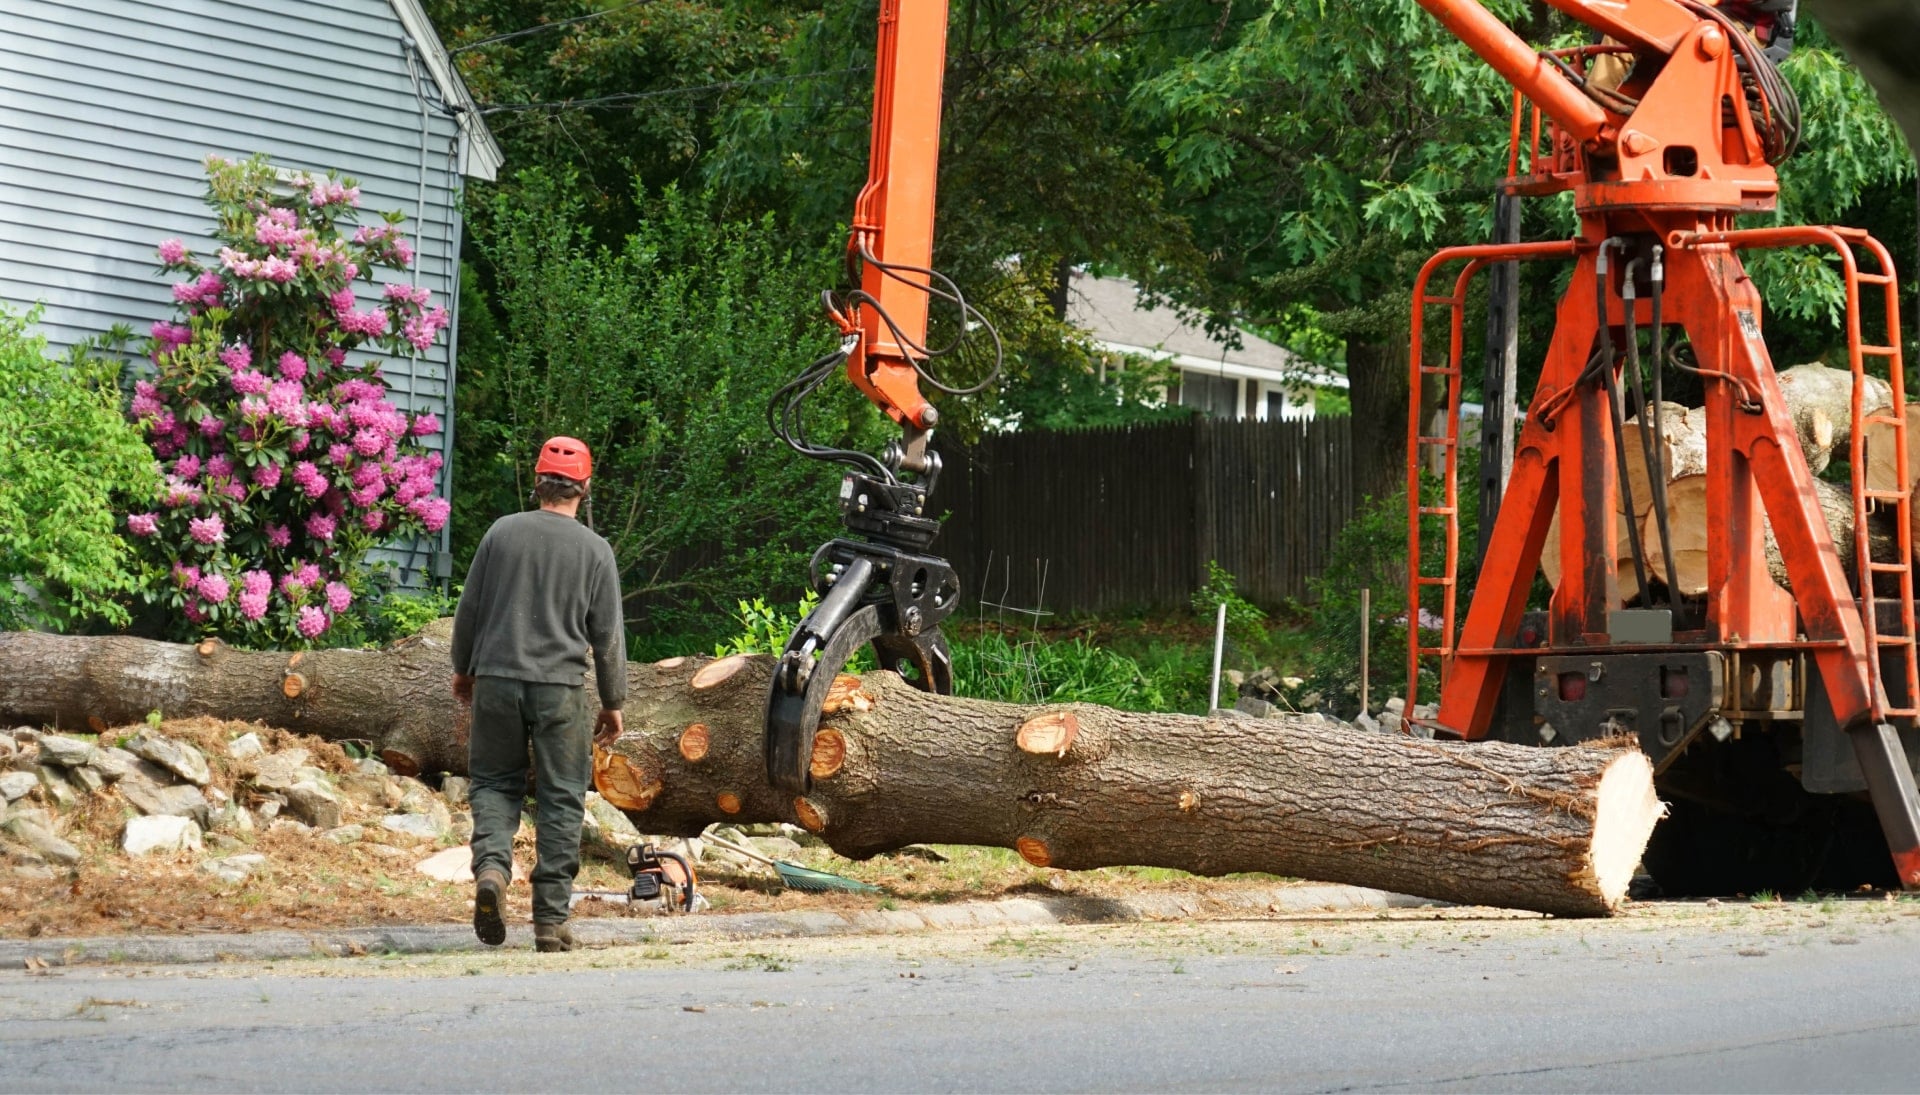 Local partner for Tree removal services in Kernersville